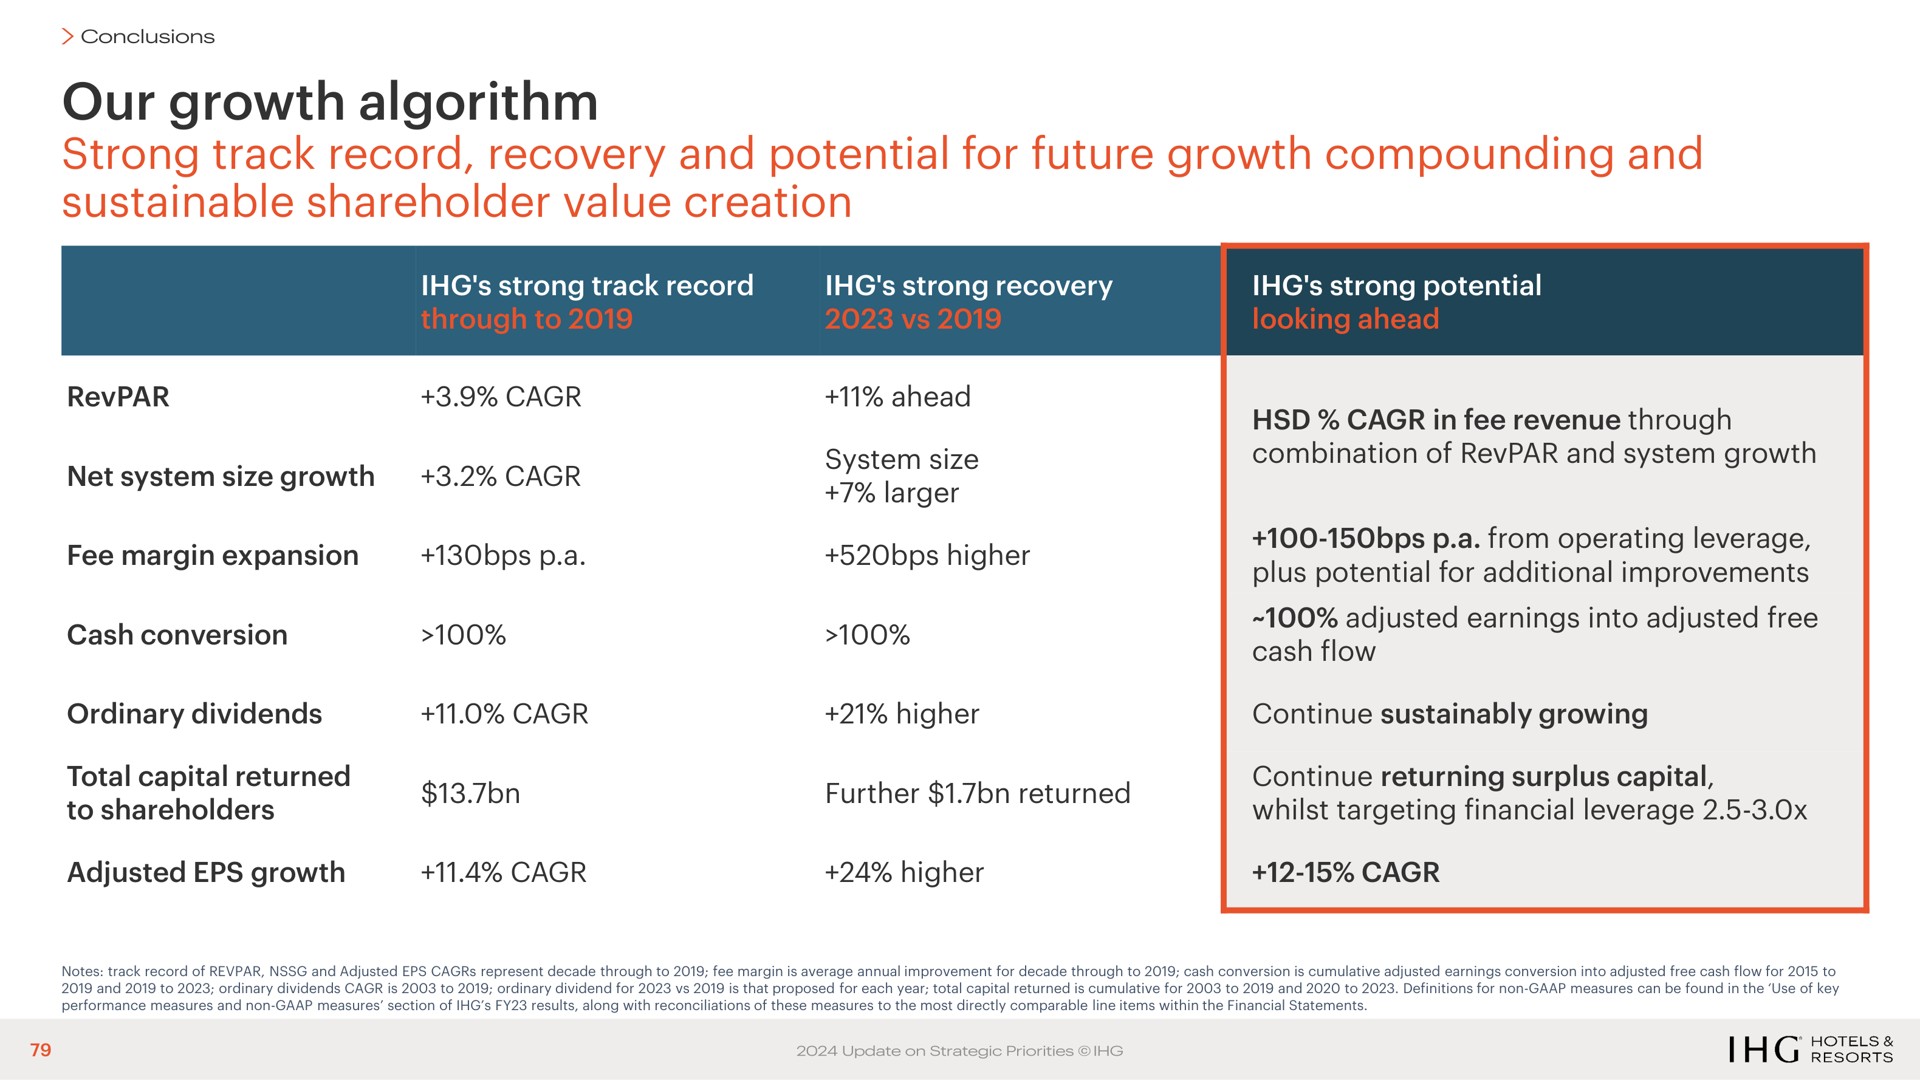 our growth algorithm strong track record recovery and potential for future growth compounding and sustainable shareholder value creation | IHG Hotels